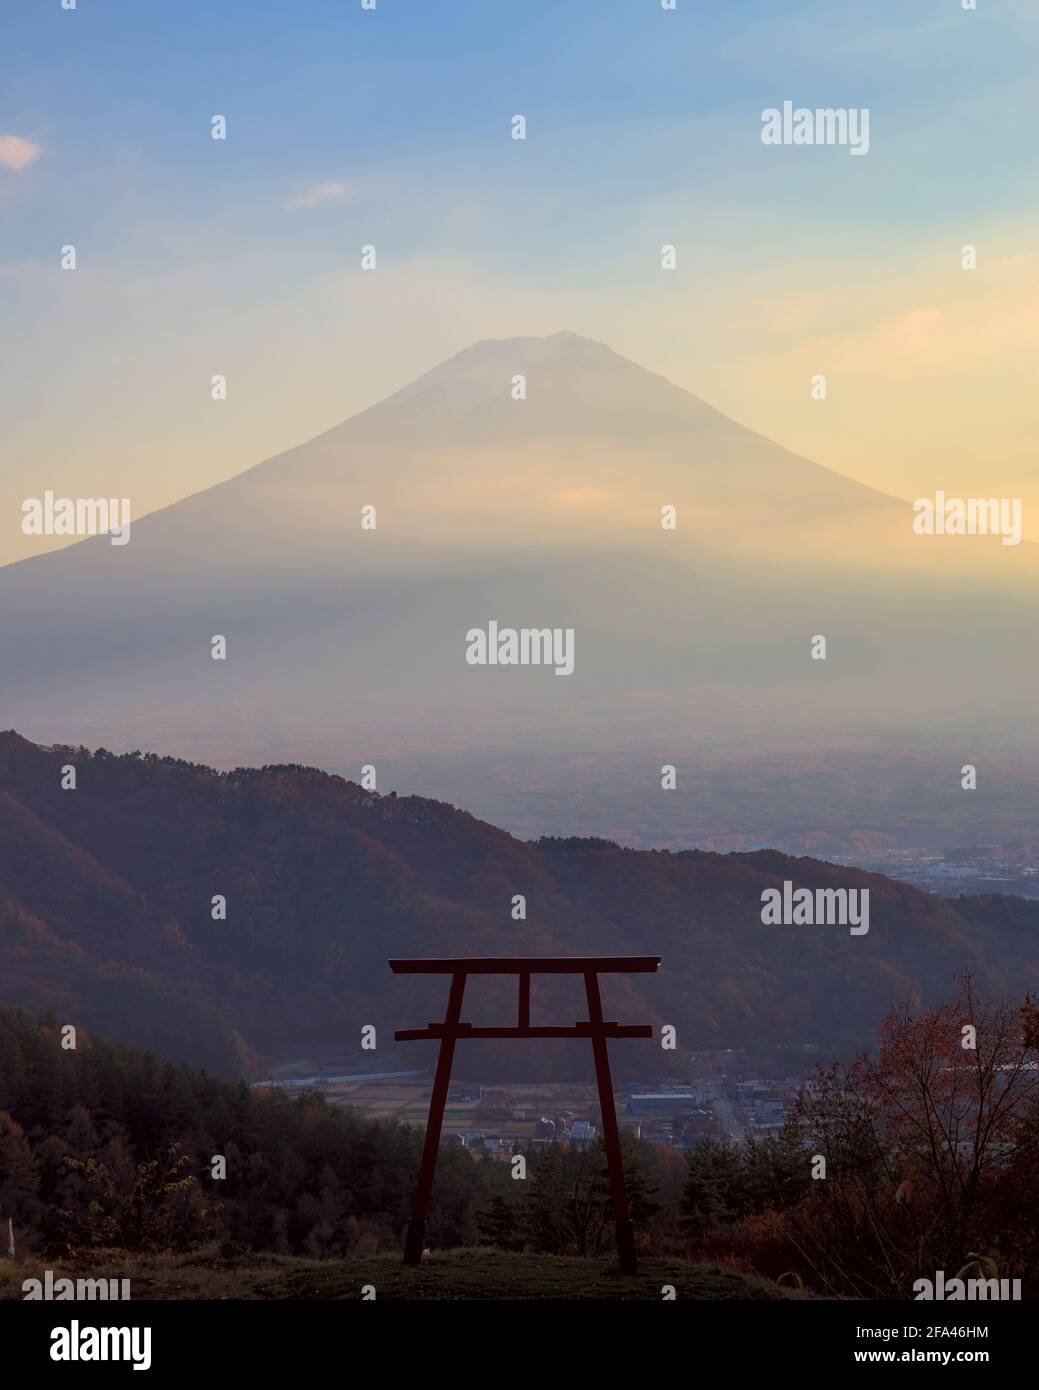 View of the silhouette of a torii gate with Mount Fuji visible in the background at dusk Stock Photo